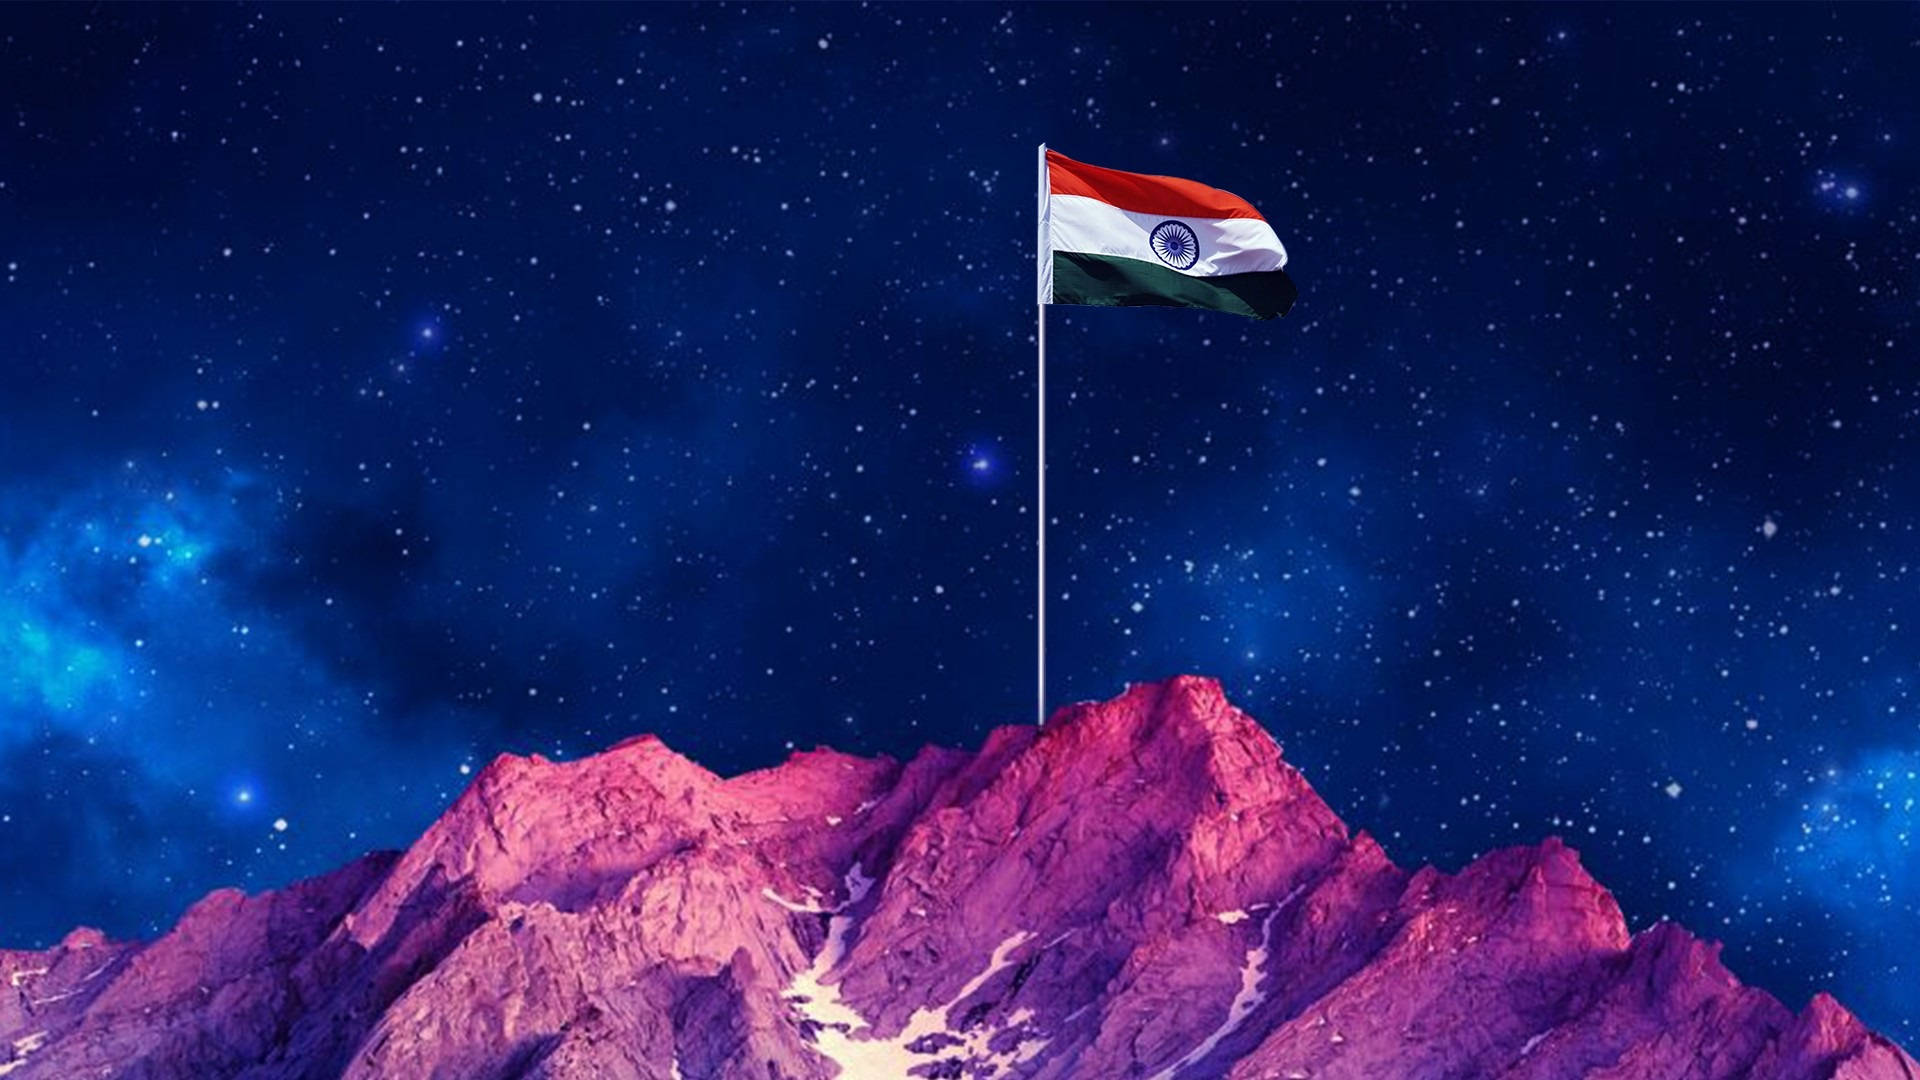 Download Flag Of India Galaxy Wallpaper 